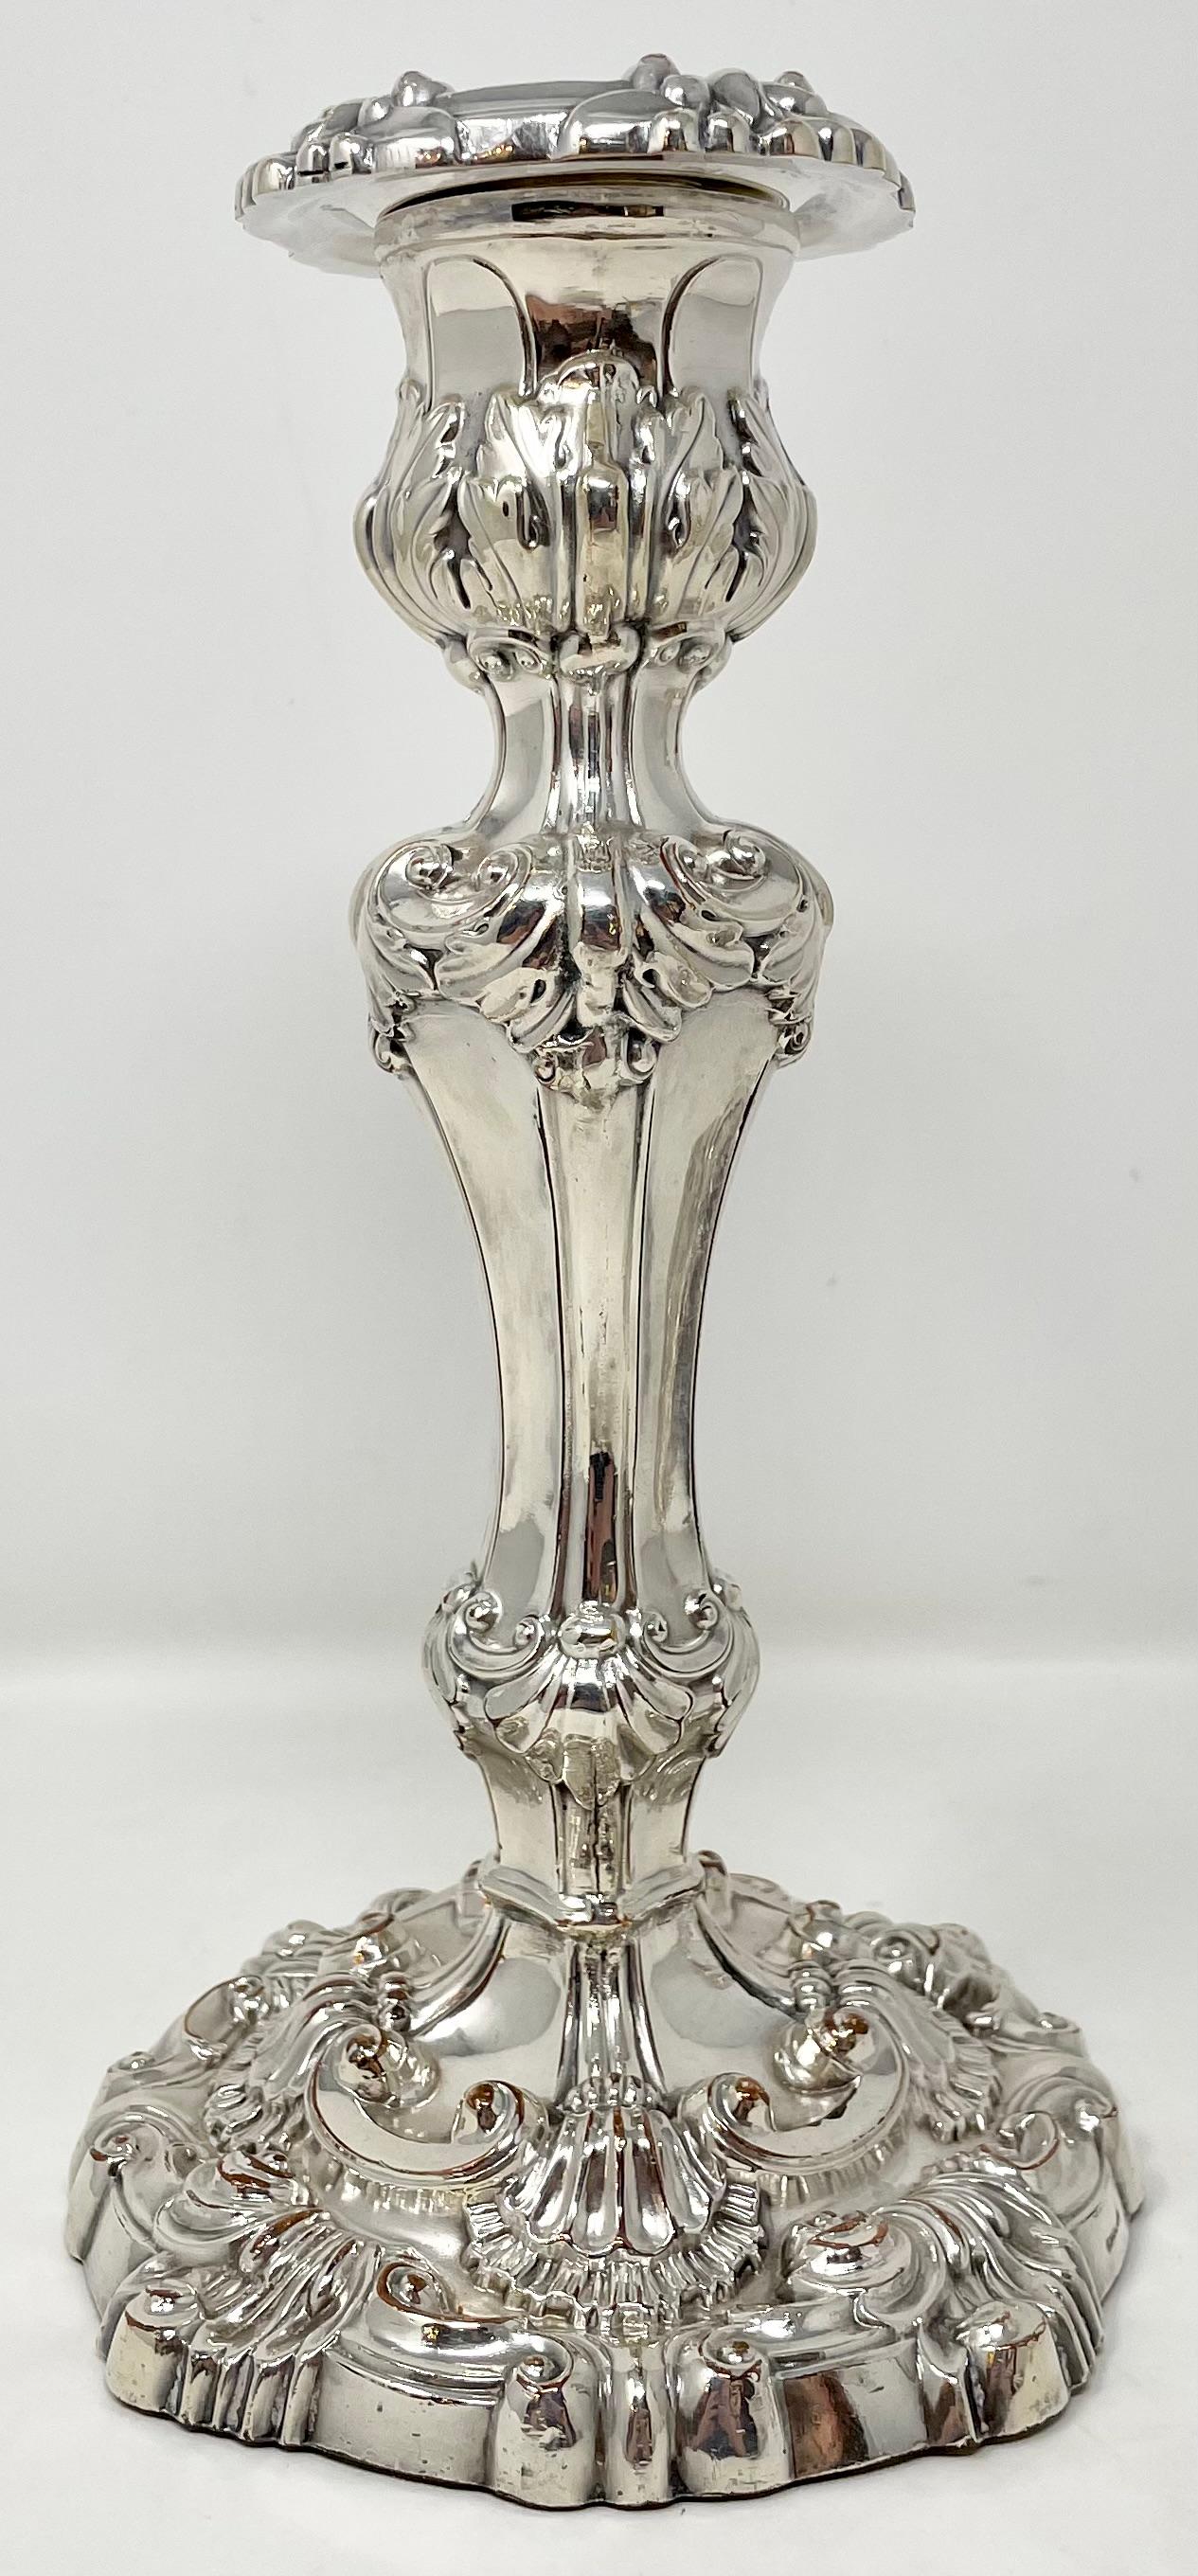 Pair antique English Sheffield silver-plated over copper 100 year old candlesticks.